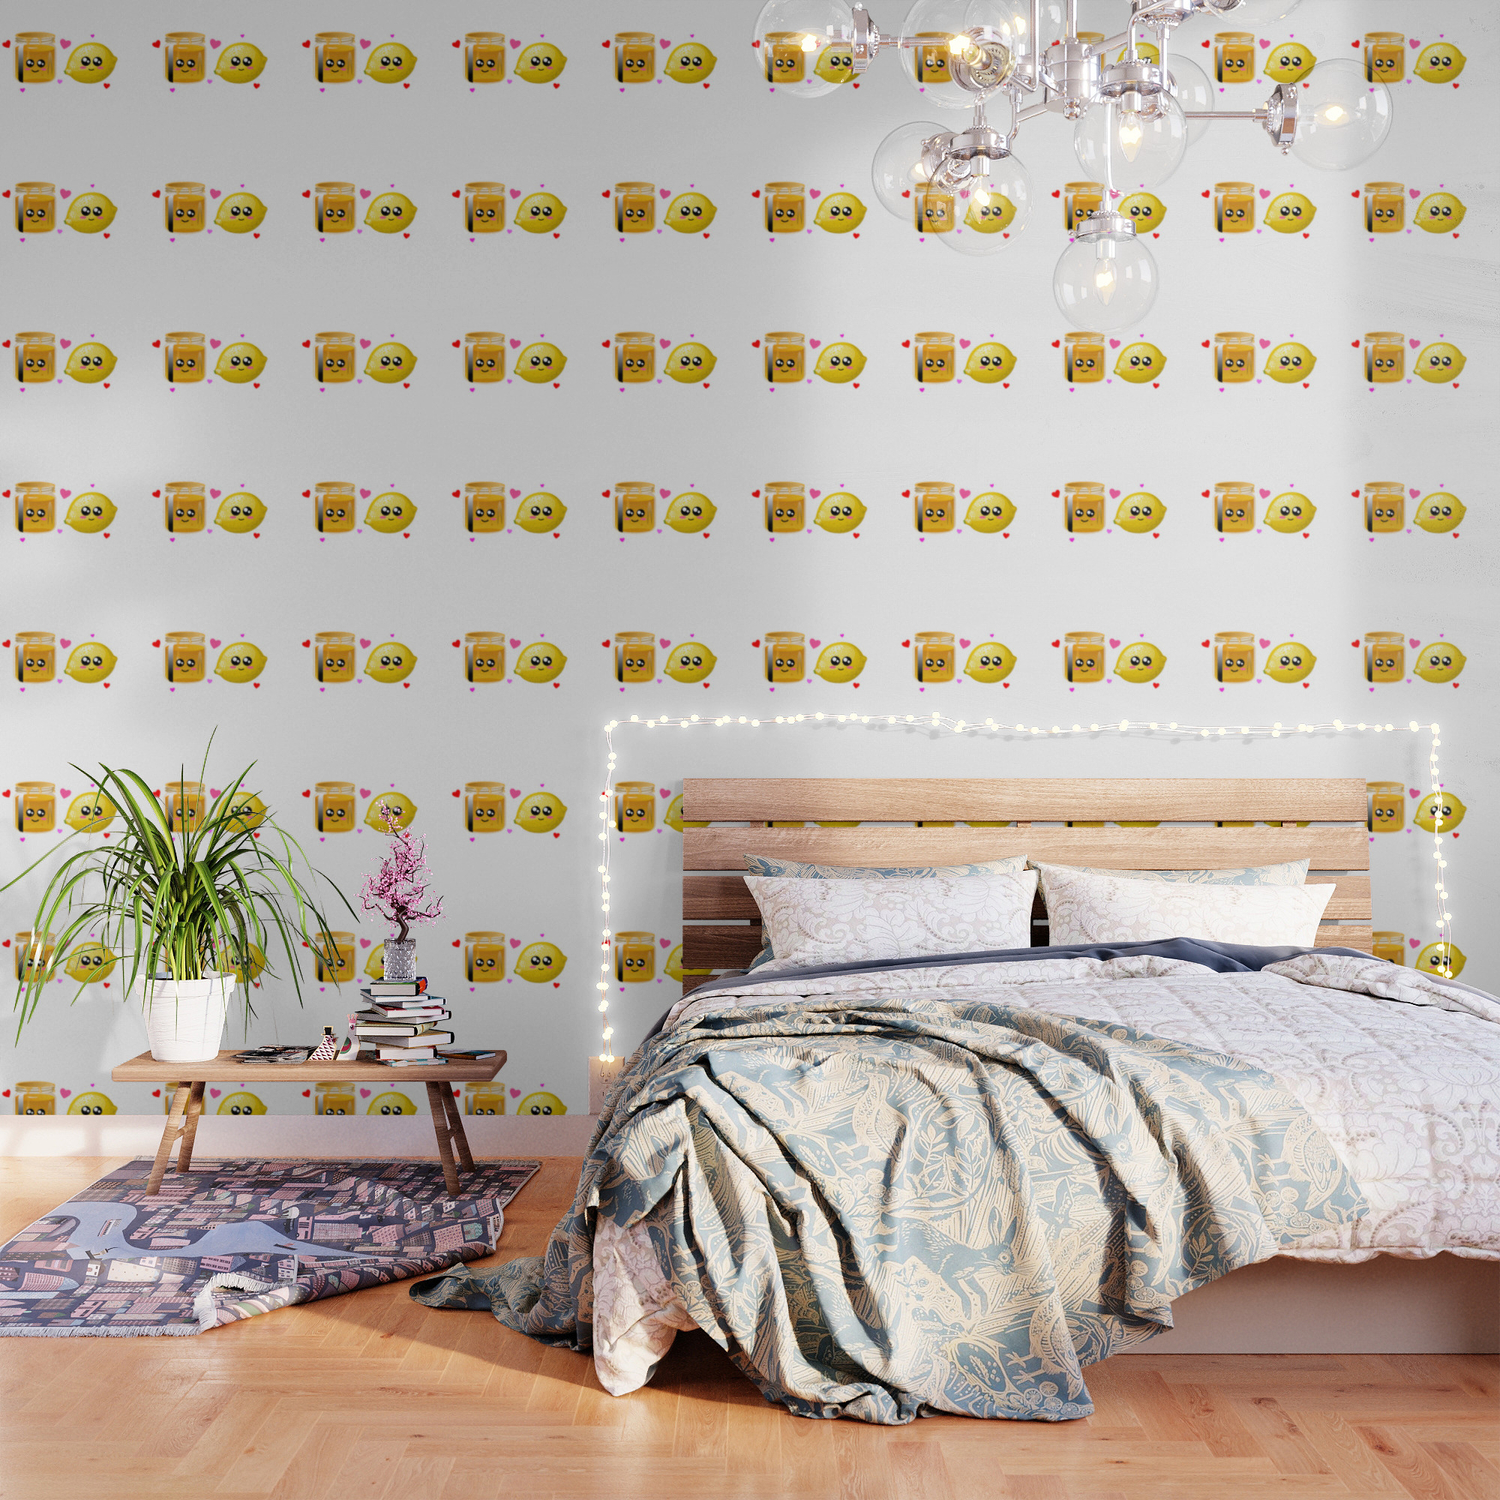 We're Better Together Cute Honey Lemon Pun Wallpaper by DogBoo | Society6